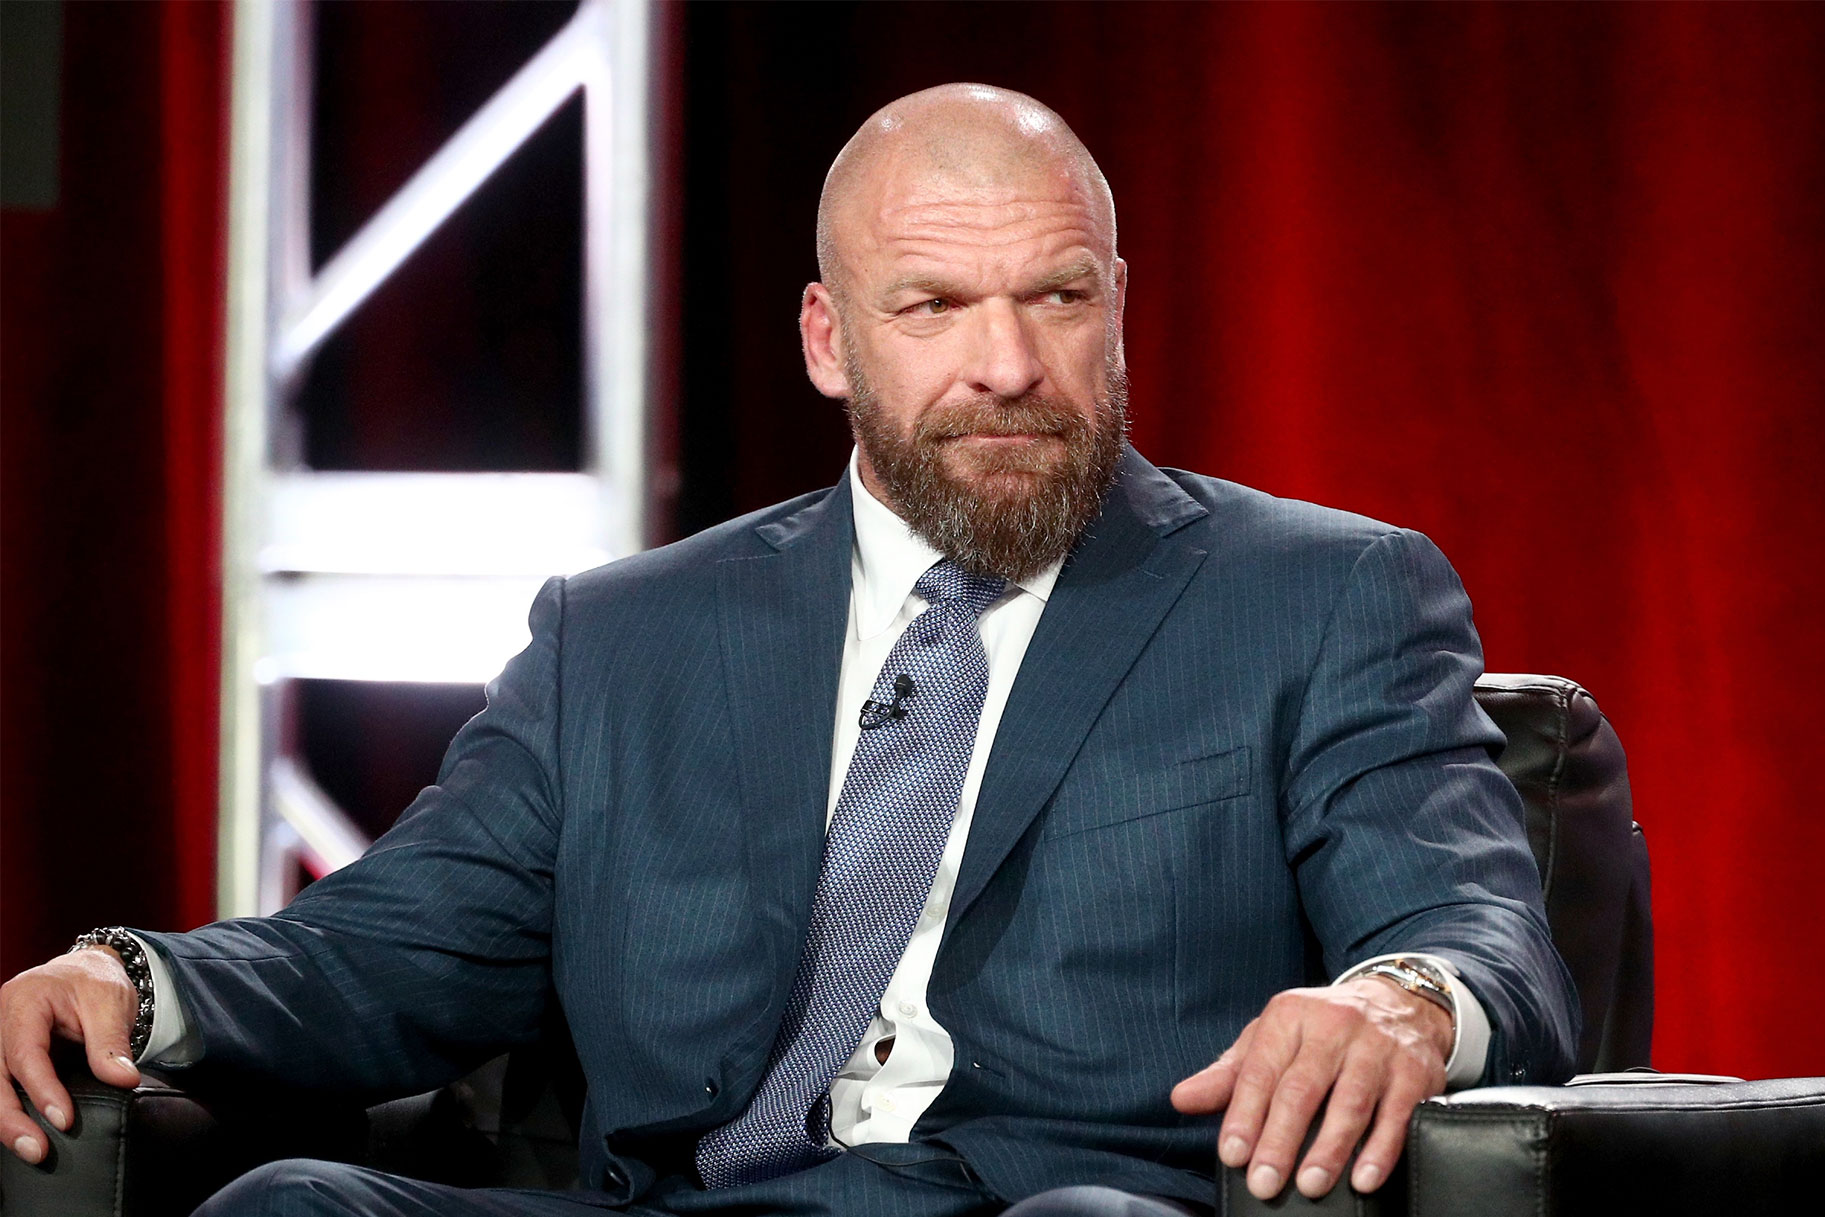 WWE News: Major Star Upset With Triple H's Response To Vince